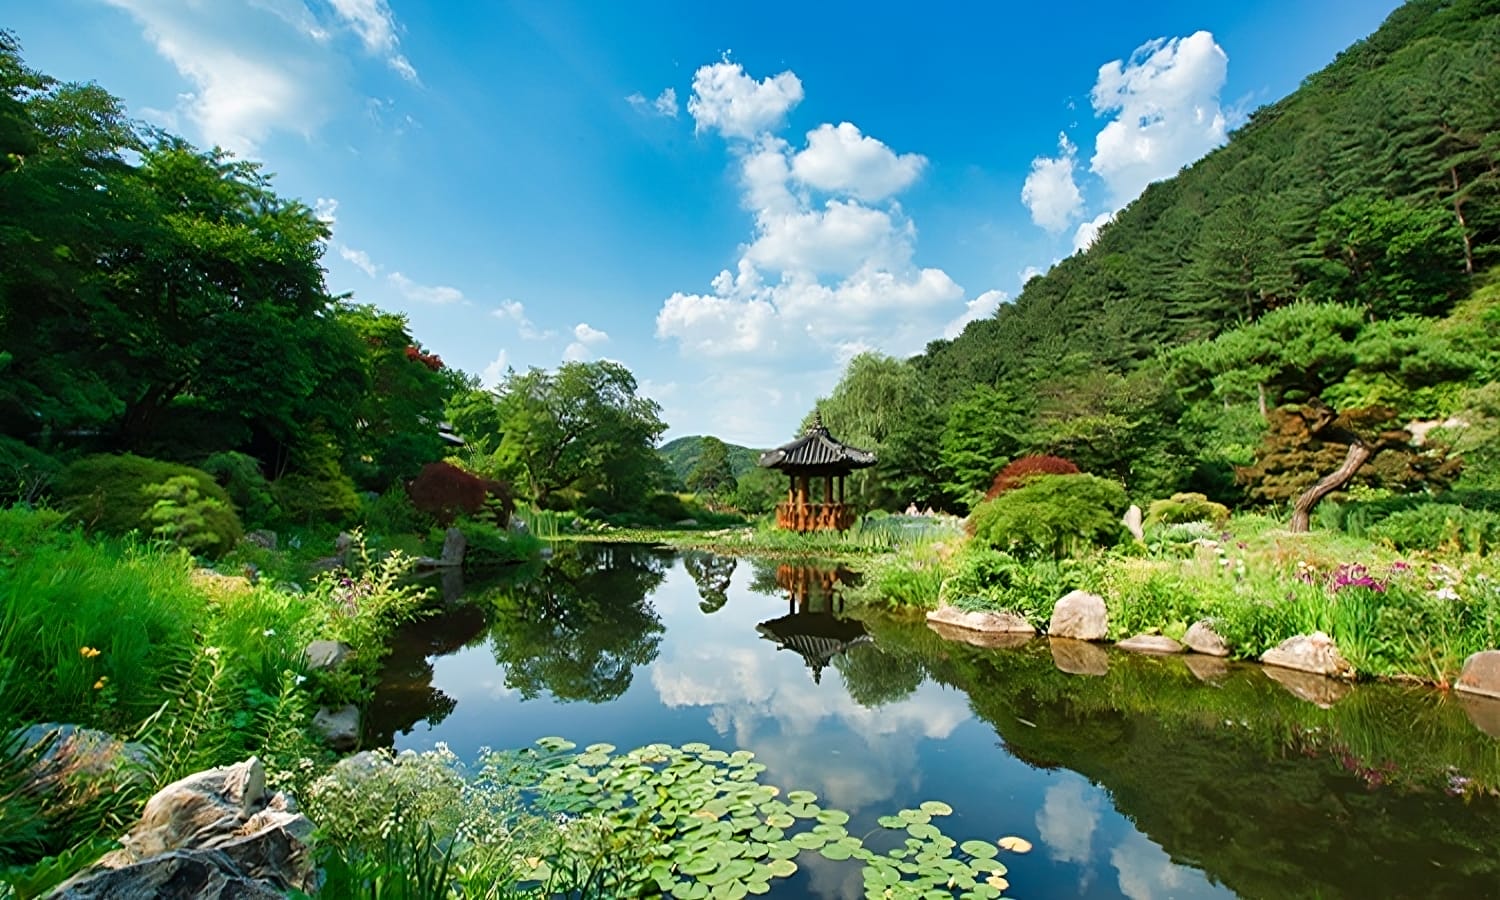 Summer Getaways in Seoul - 20+ Ways to Experience Nature in Seoul During Summer 32